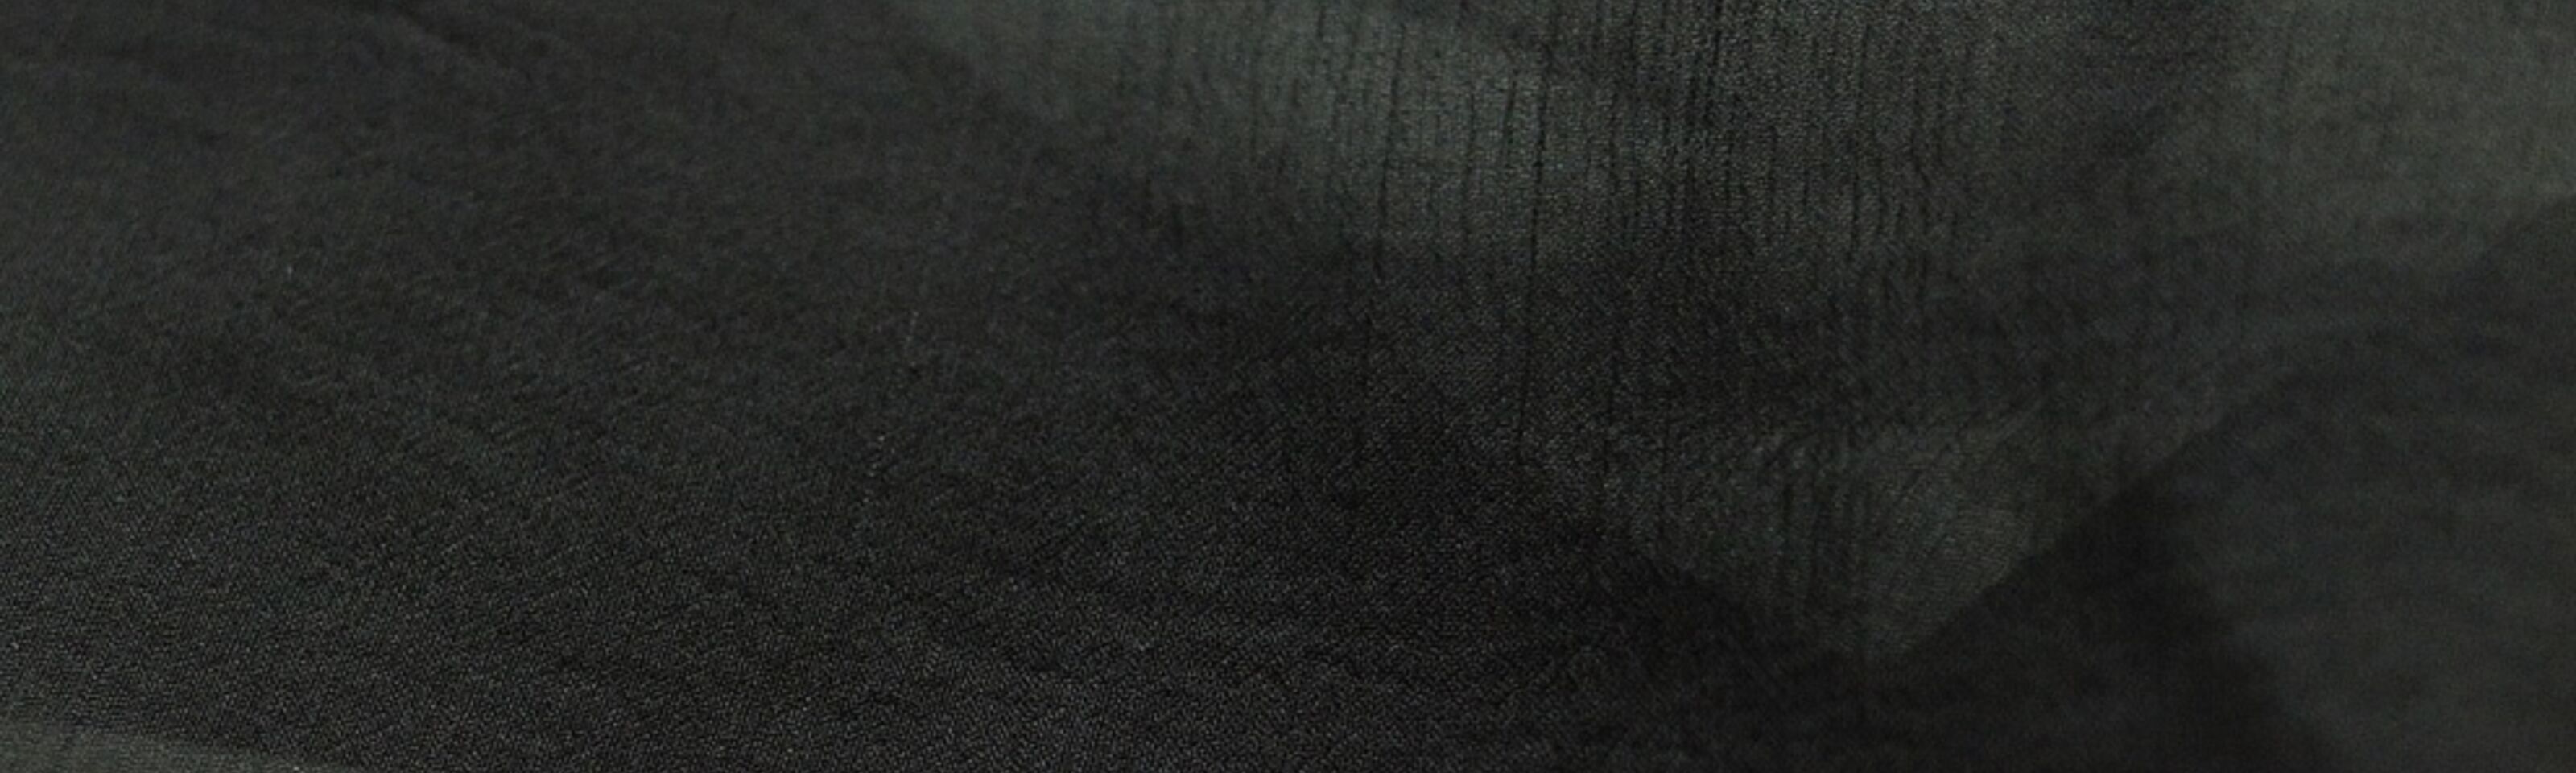 For The Finer Things - Black Silk Crinkle Chiffon Dress Fabric CU